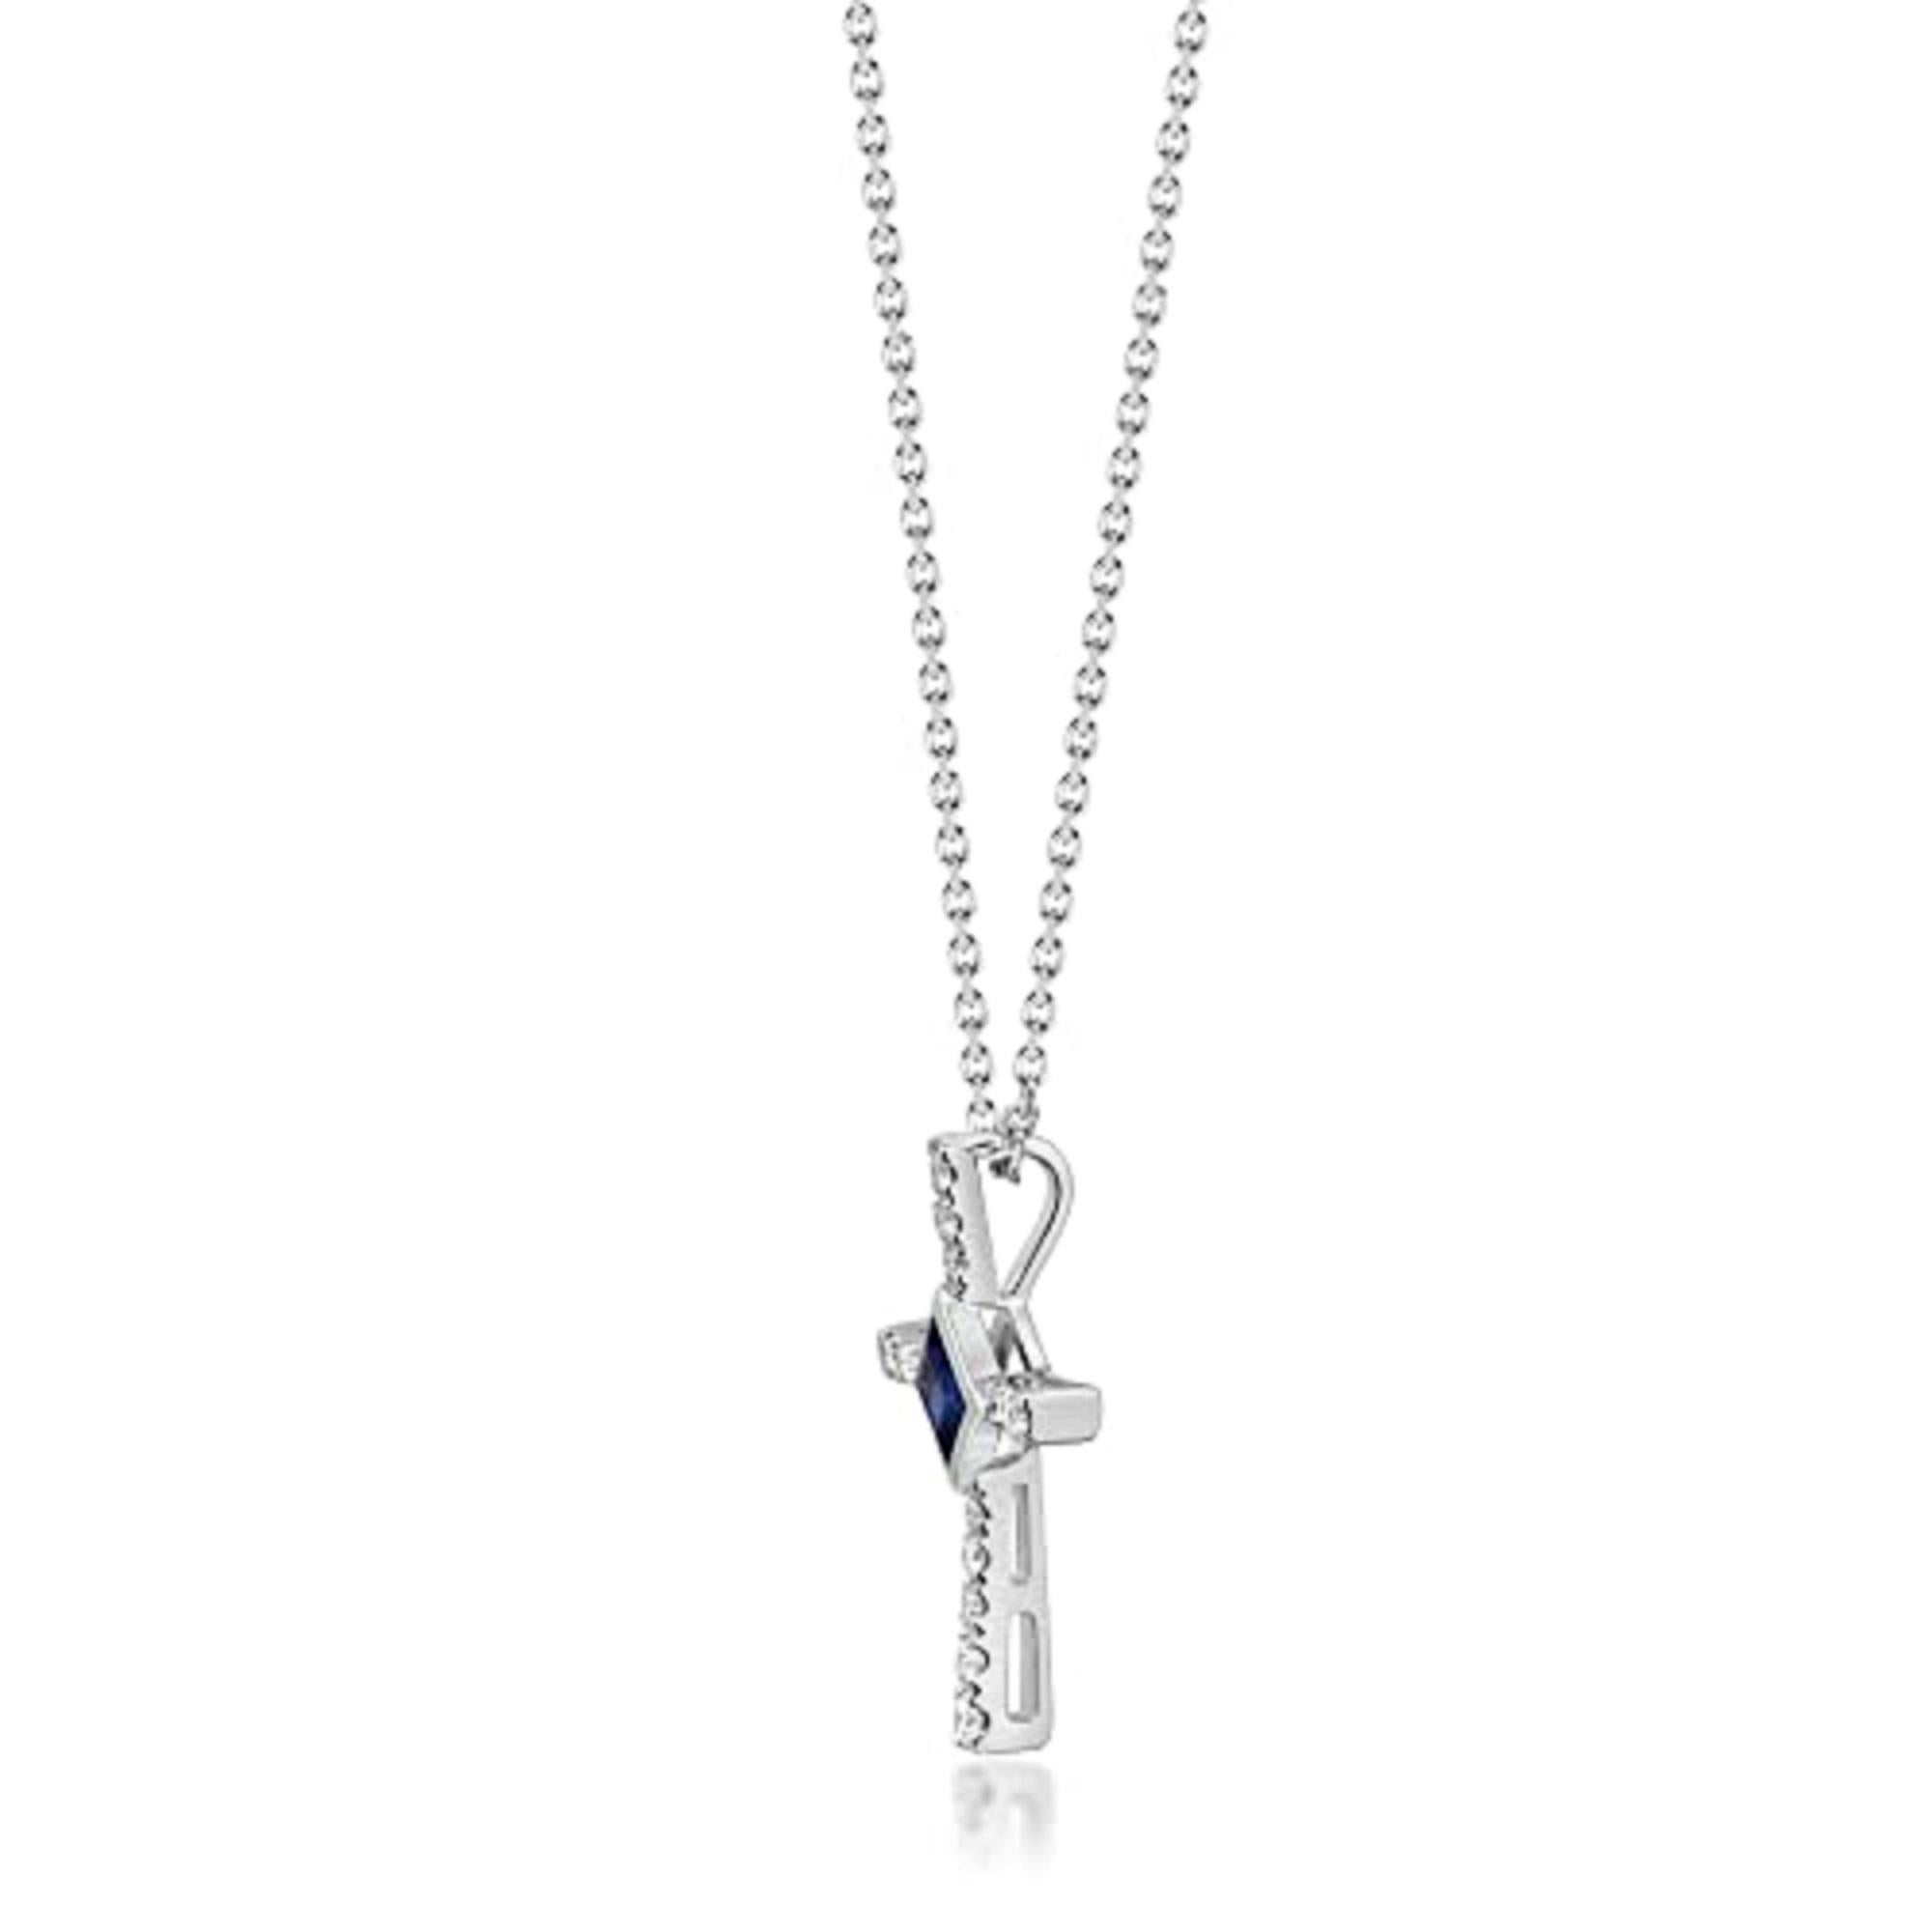 Decorate yourself in elegance with this Pendant is crafted from 14-karat White Gold by Gin & Grace Pendant. This Pendant is made up of 3.0mm square-cut Prong setting blue sapphire (1 Pcs) 0.26 Carat and Round-Cut Prong setting White Diamond (14 Pcs)